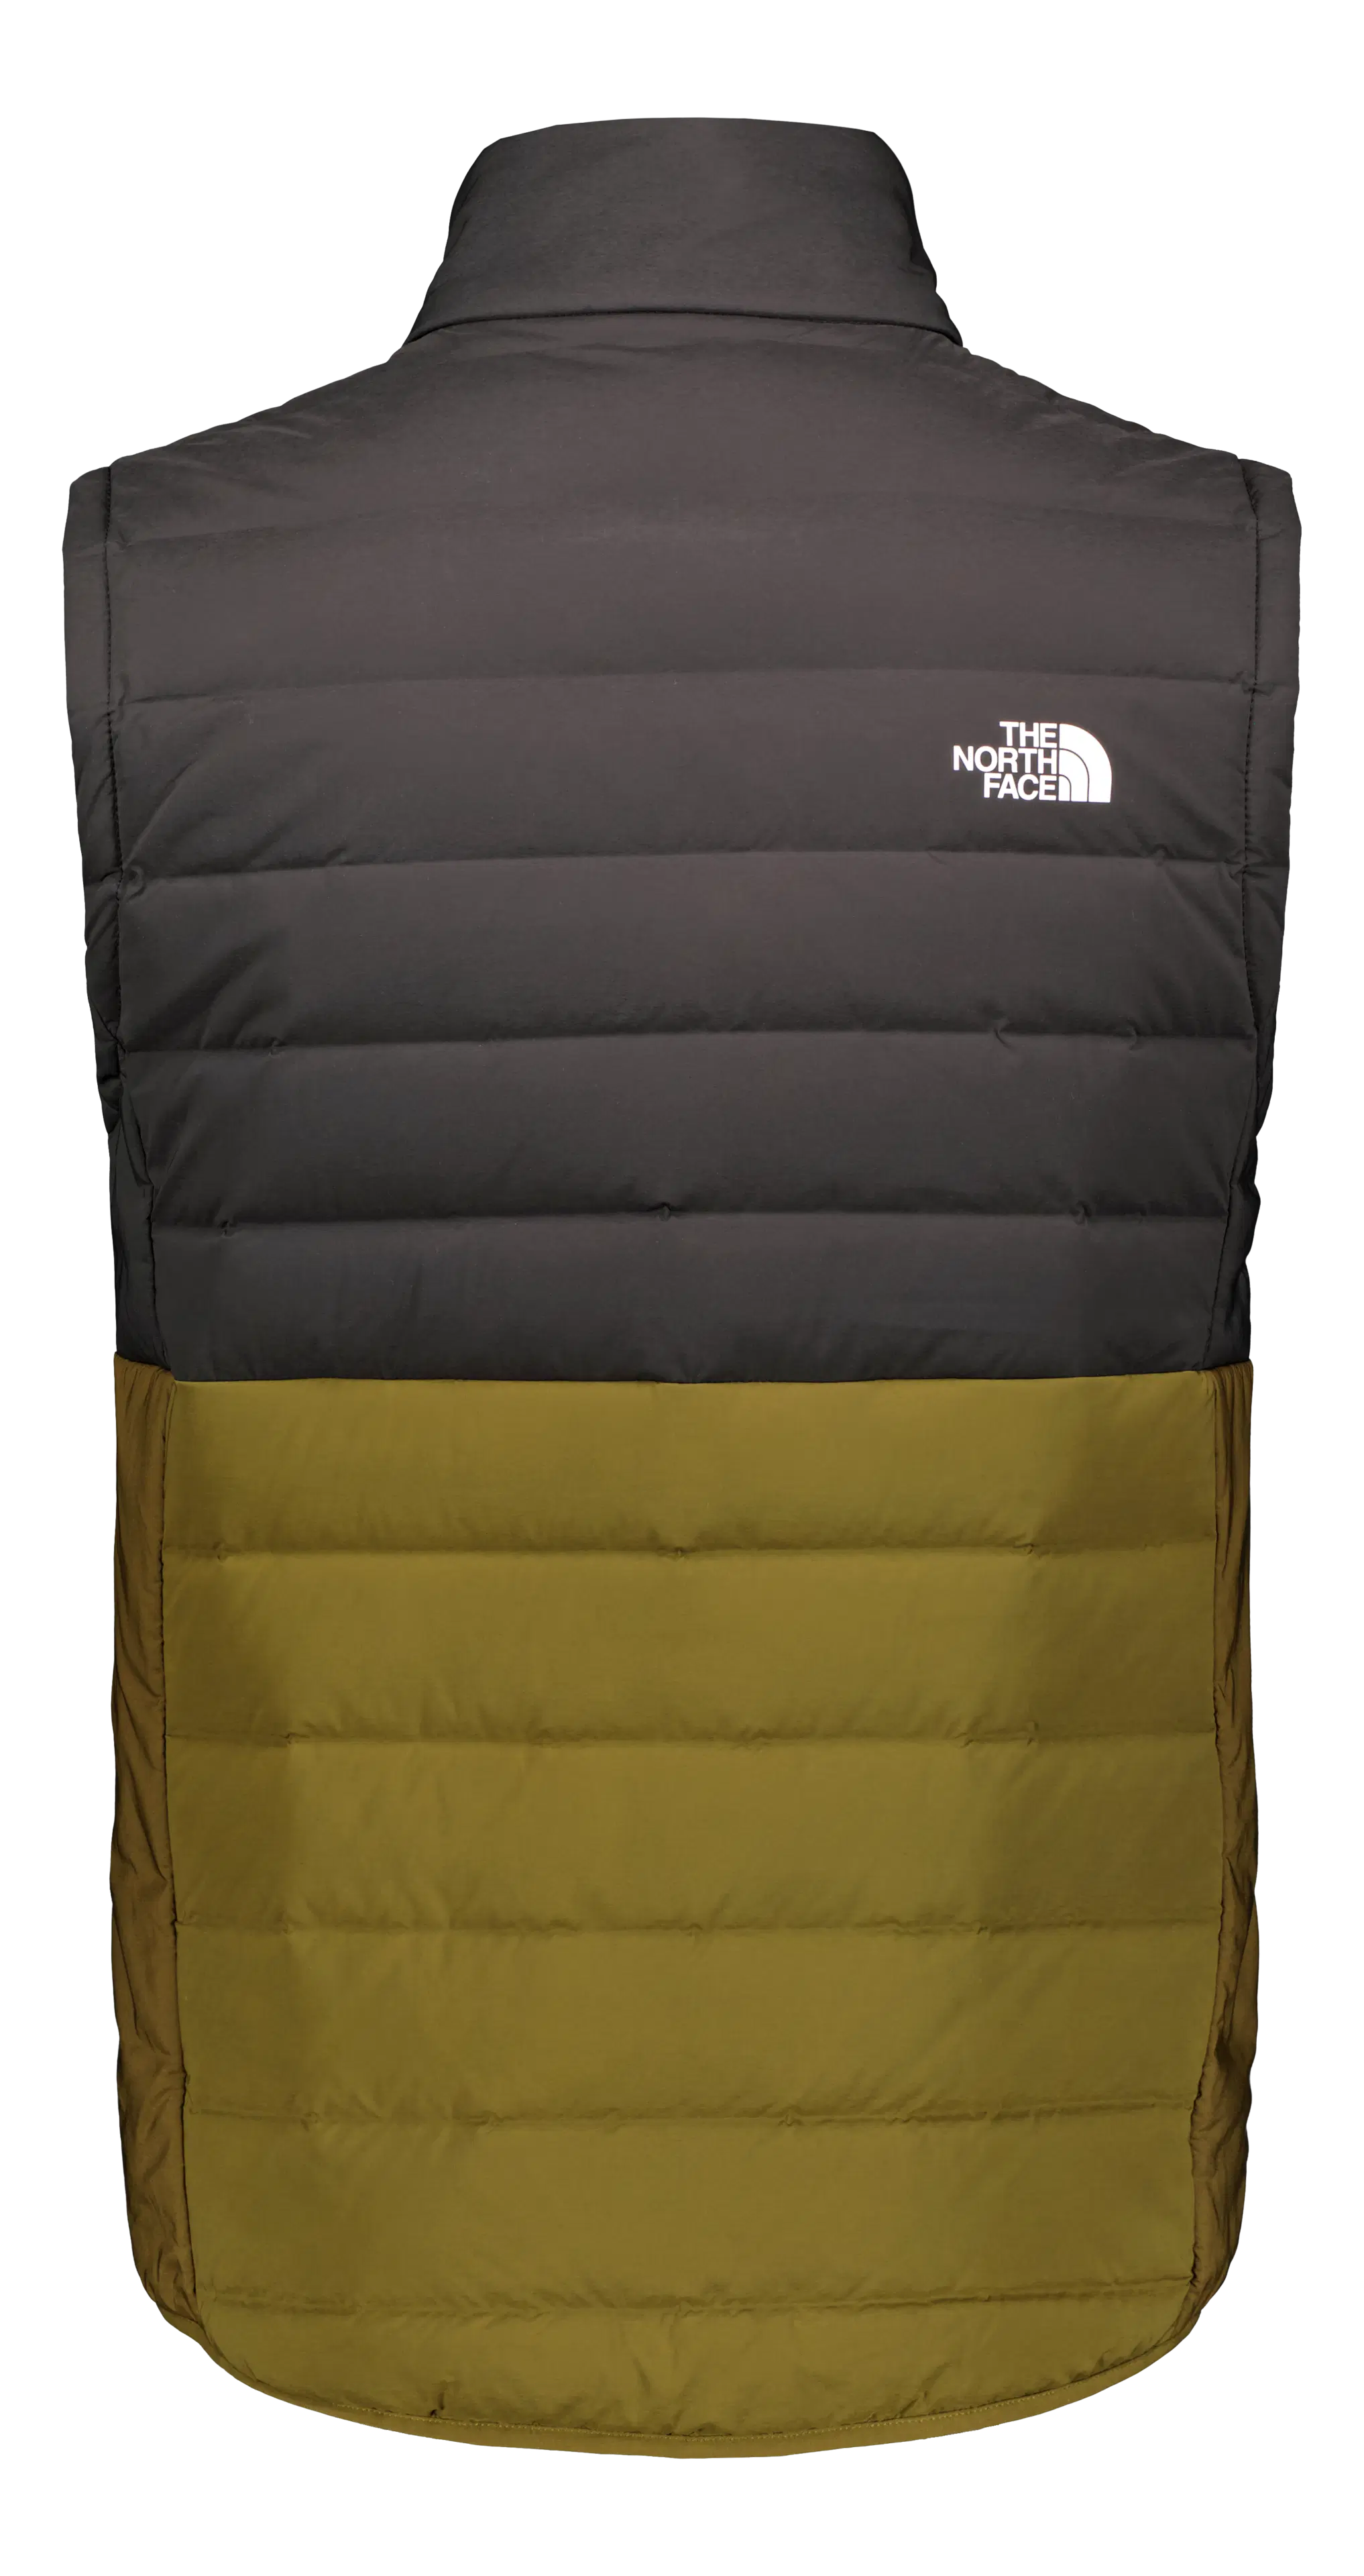 The North Face Belleview stretch toppaliivi